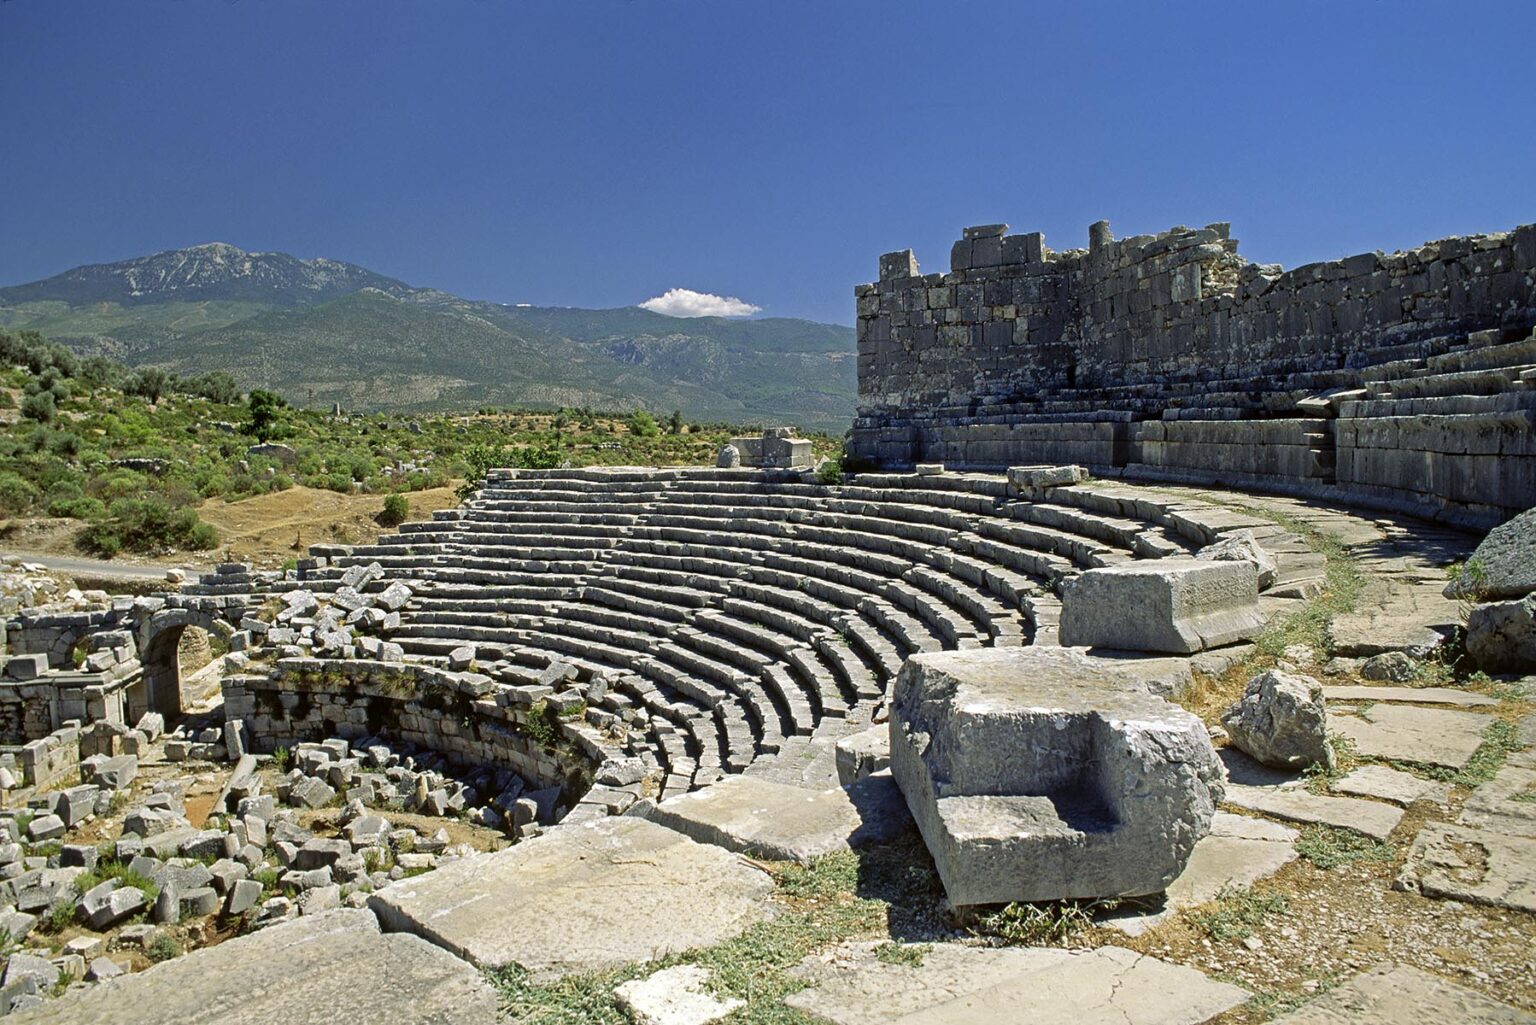 AMPHITHEATER at XANTHOS (LYCIA'S ancient capital dating back to the 5th Cent. BC) - TURKEY